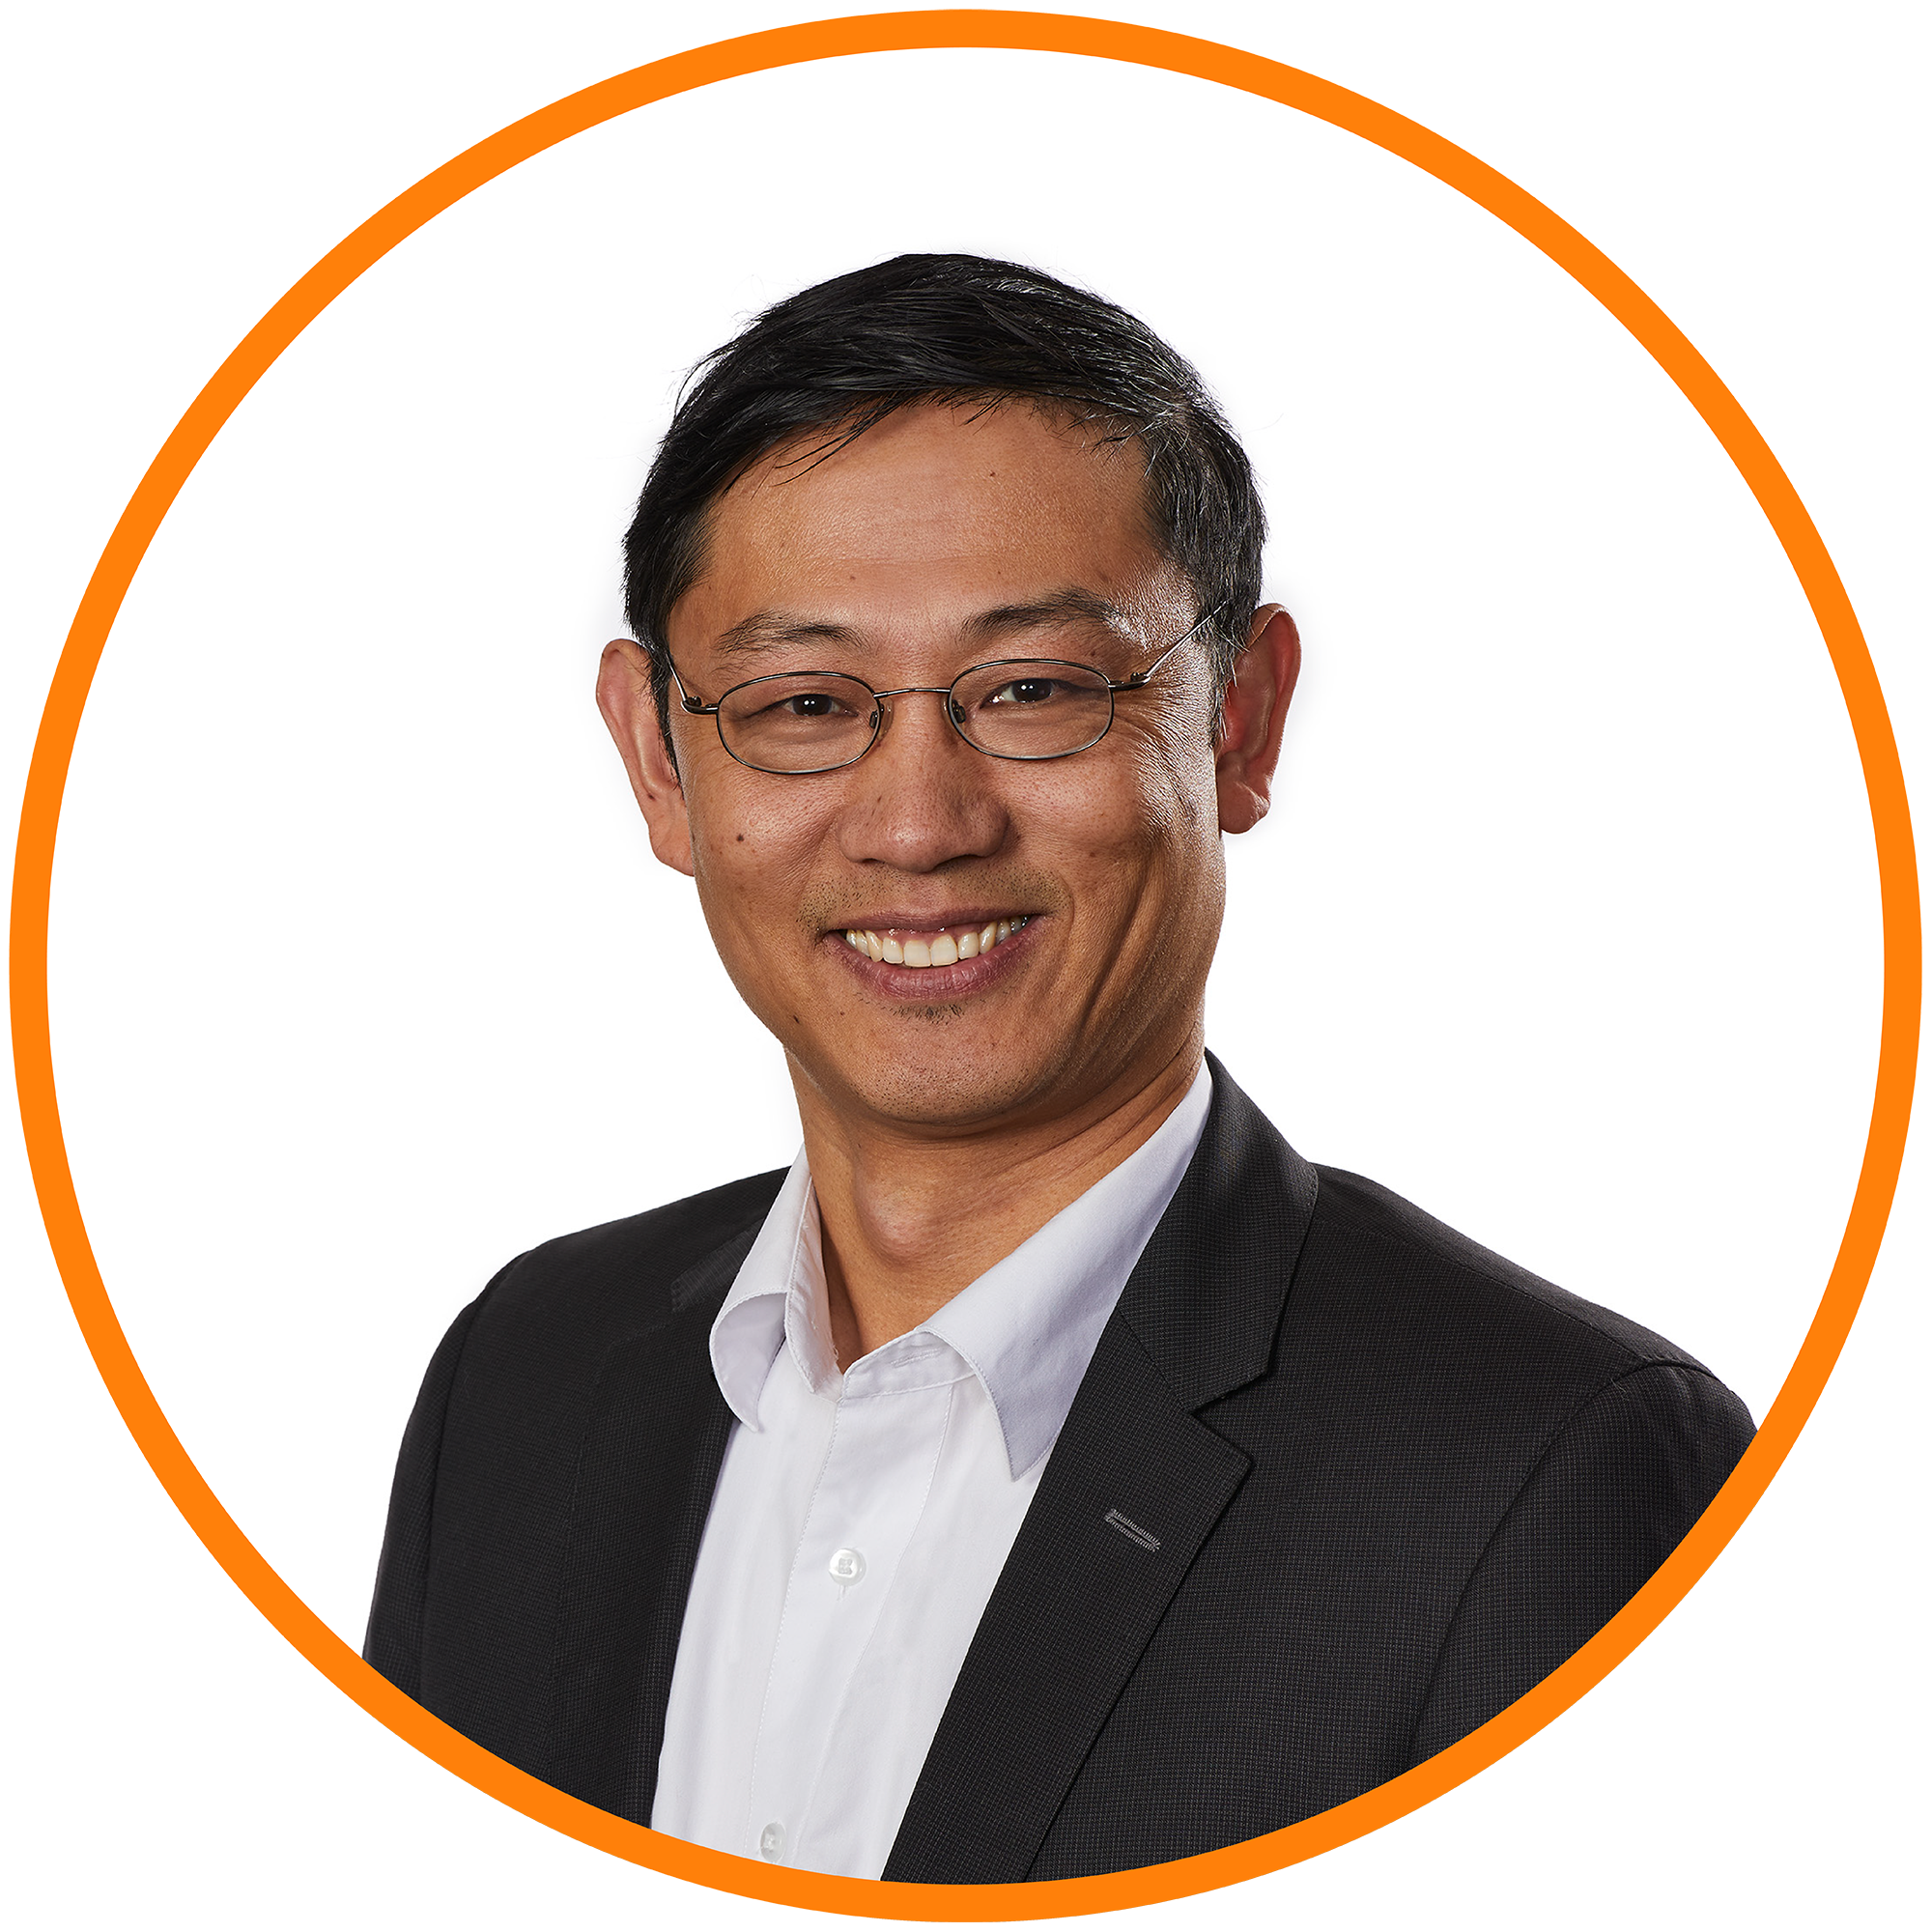 Philip Yu, Director of Products